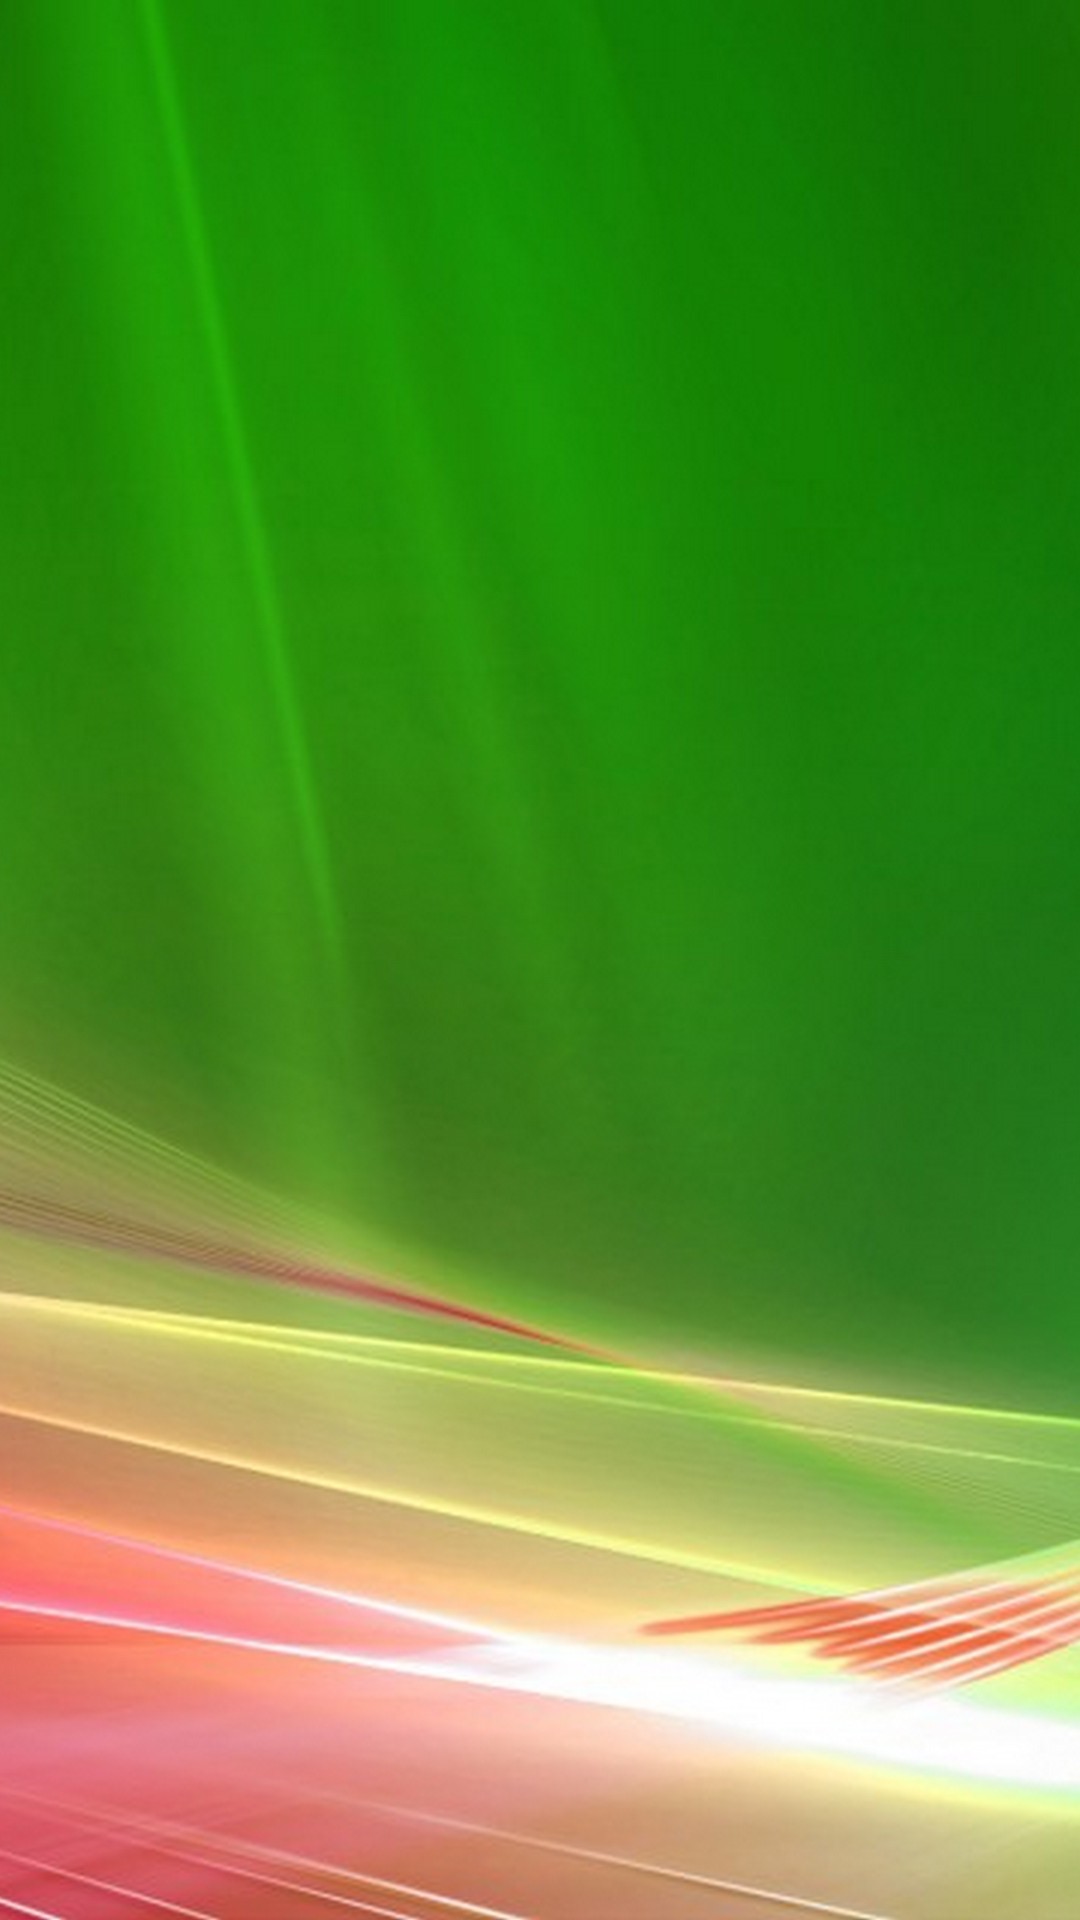 Light Green HD Wallpapers For Android with image resolution 1080x1920 pixel. You can make this wallpaper for your Android backgrounds, Tablet, Smartphones Screensavers and Mobile Phone Lock Screen